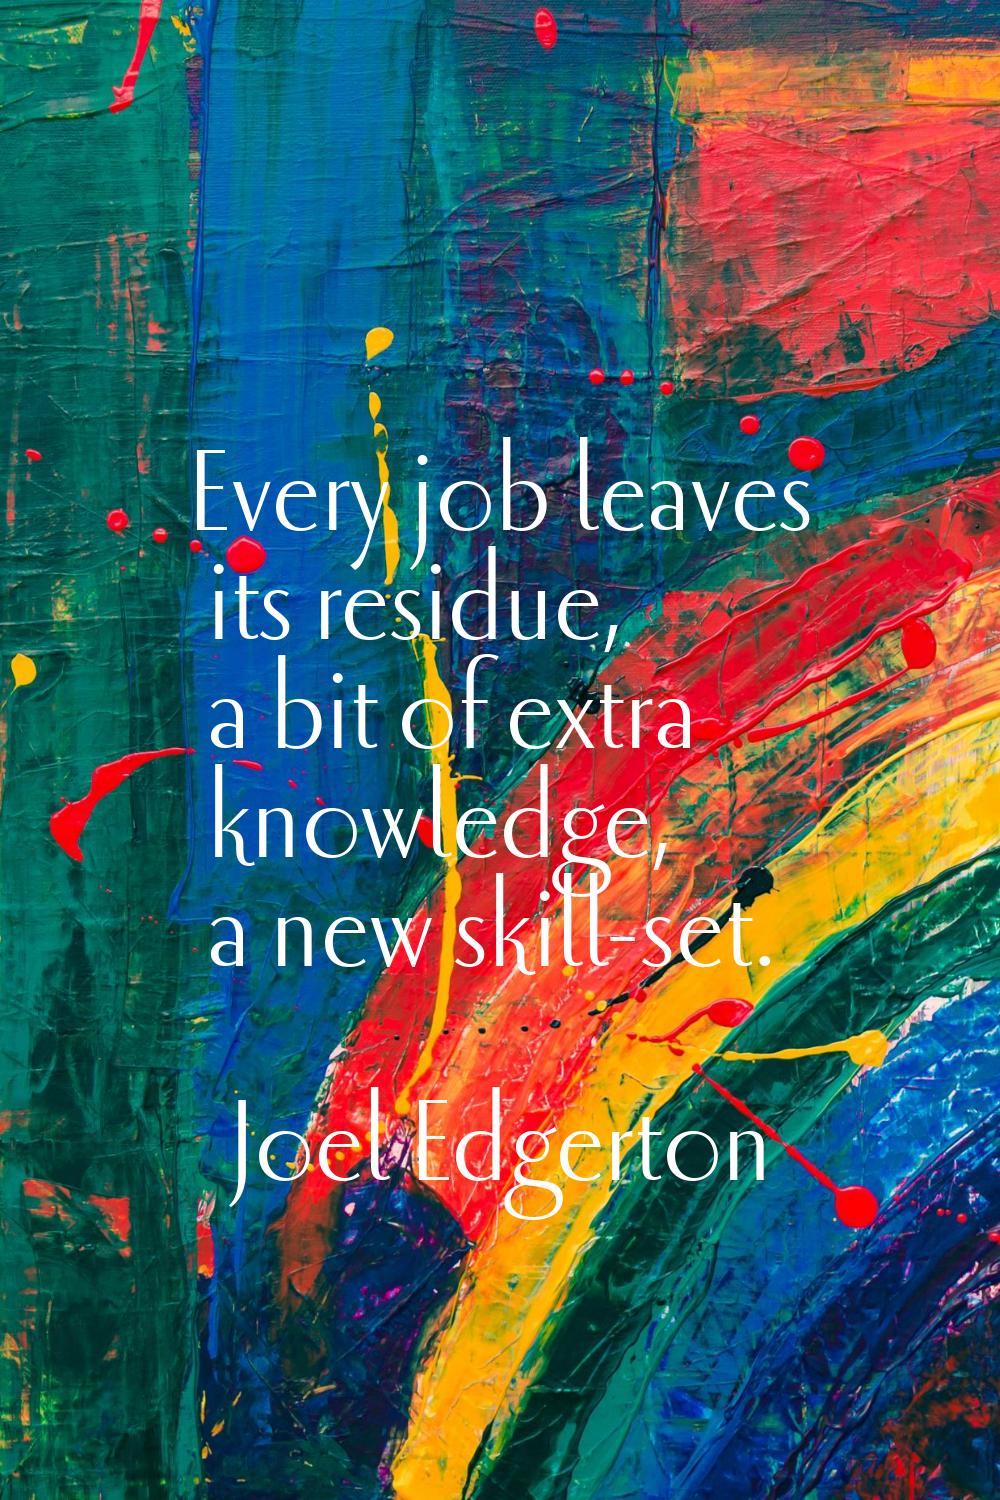 Every job leaves its residue, a bit of extra knowledge, a new skill-set.